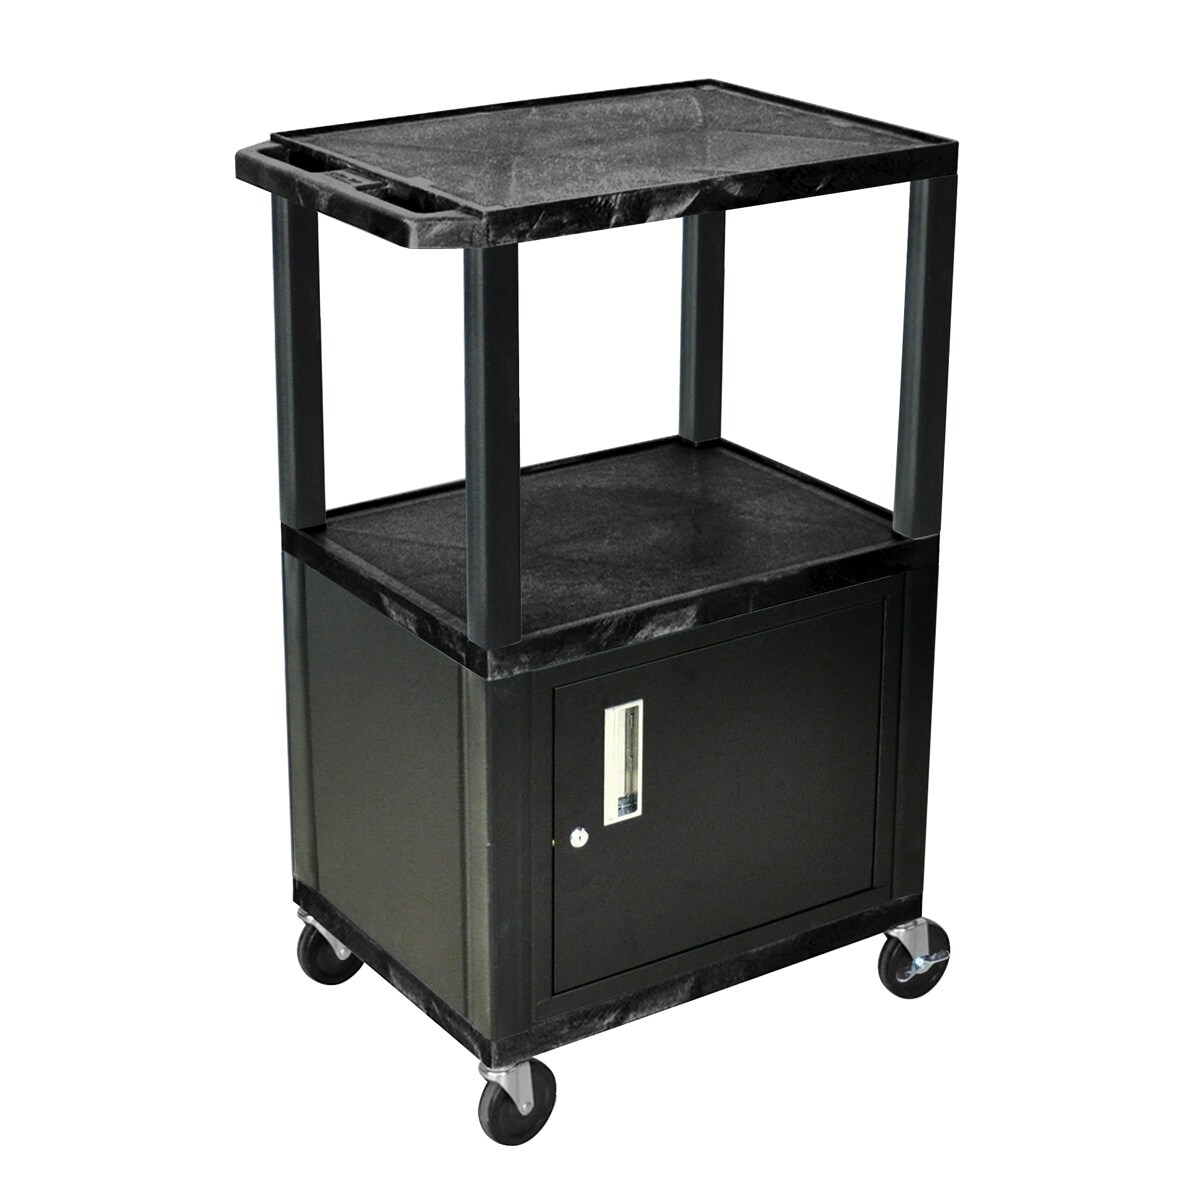 H.wilson 42 inch Black Tuffy Multi purpose Utility Cart With Cabinet (Black20 gauge steel cabinetIncludes lock with two (2) sets of keysRecessed chrome handle3 outlet UL listed electrical assemble a 15 foot cordCord management wrapThree cable management c